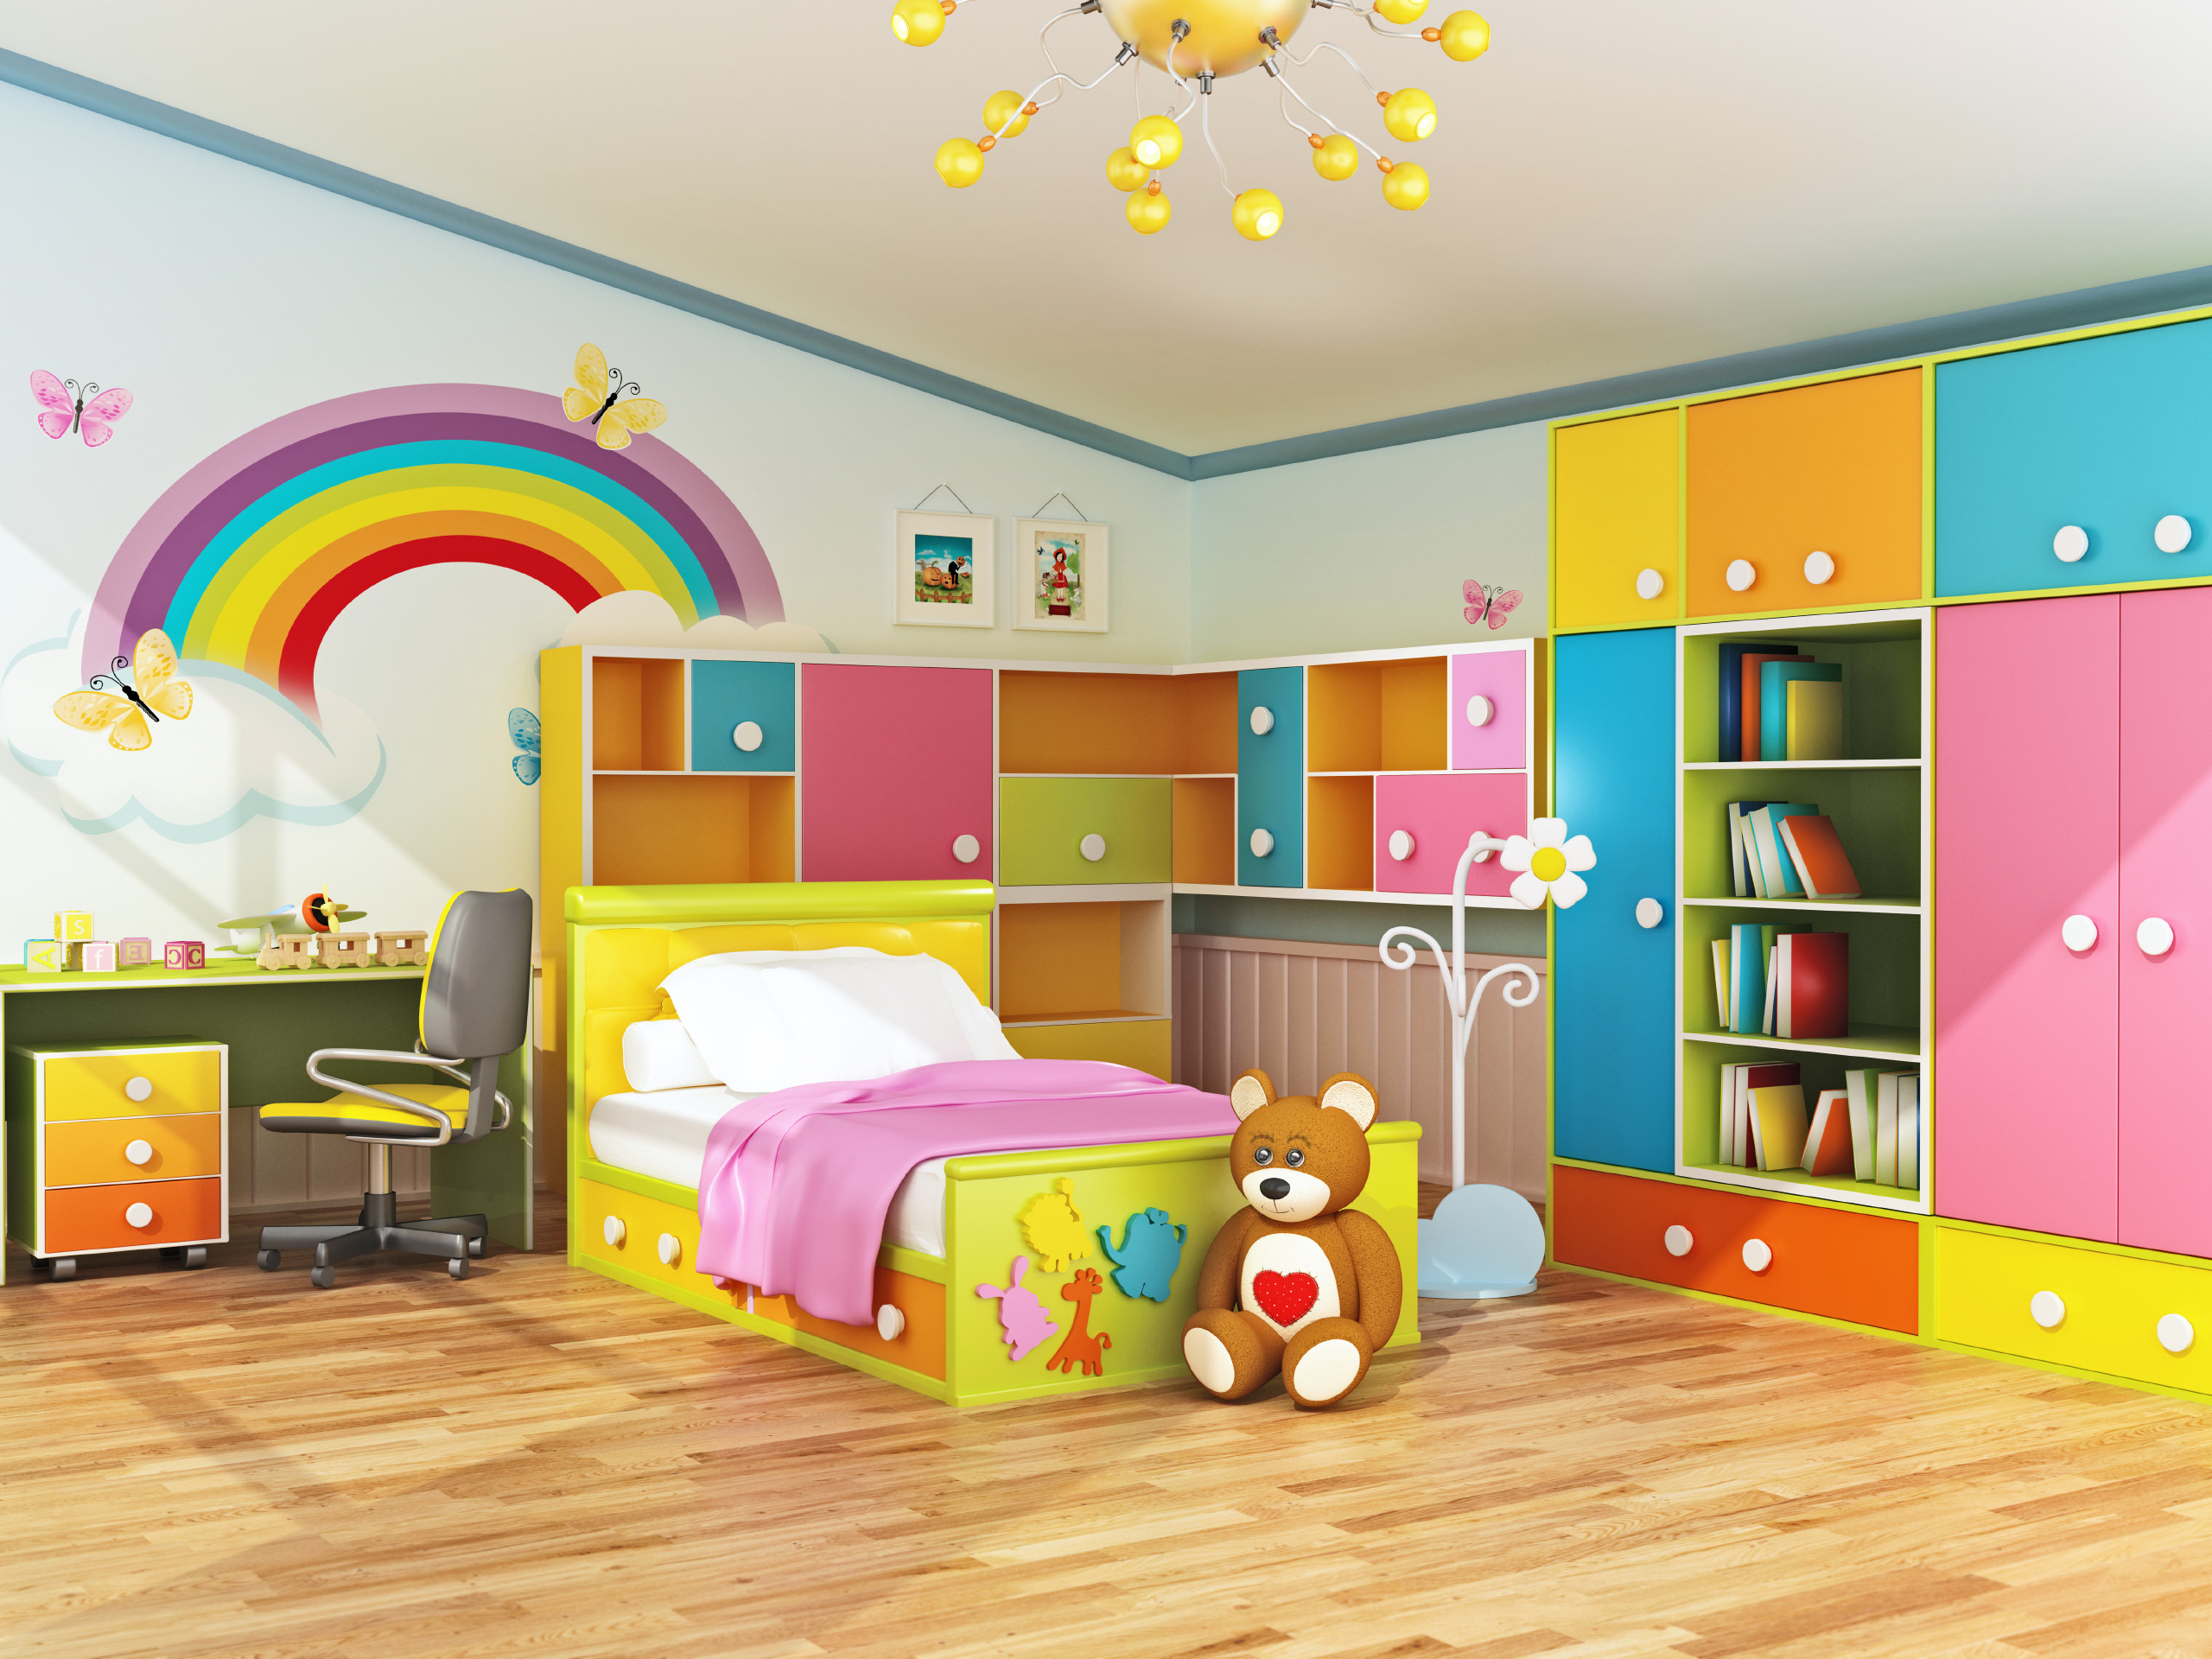 Room Decorating Ideas For Kids
 Plan Ahead When Decorating Kids Bedrooms